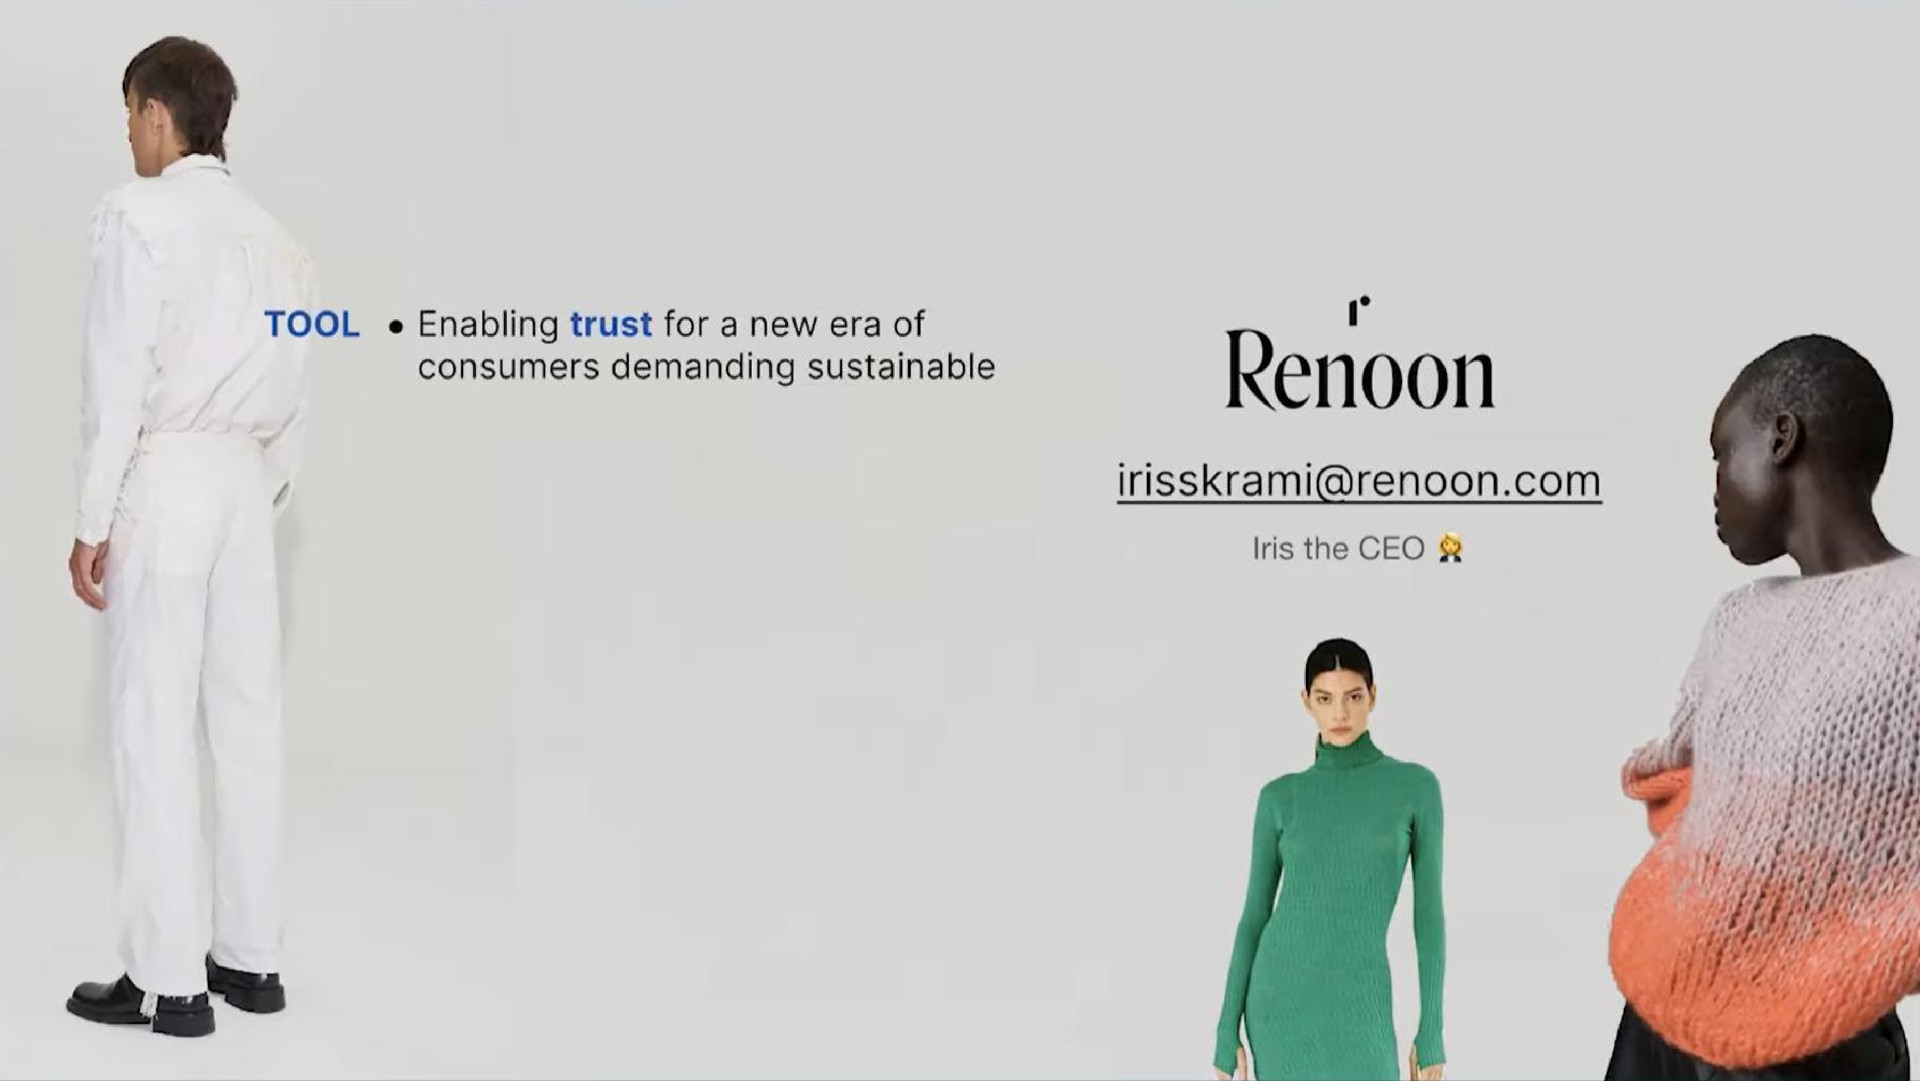 tool enabling trust for a new era of consumers demanding sustainable i | Renoon